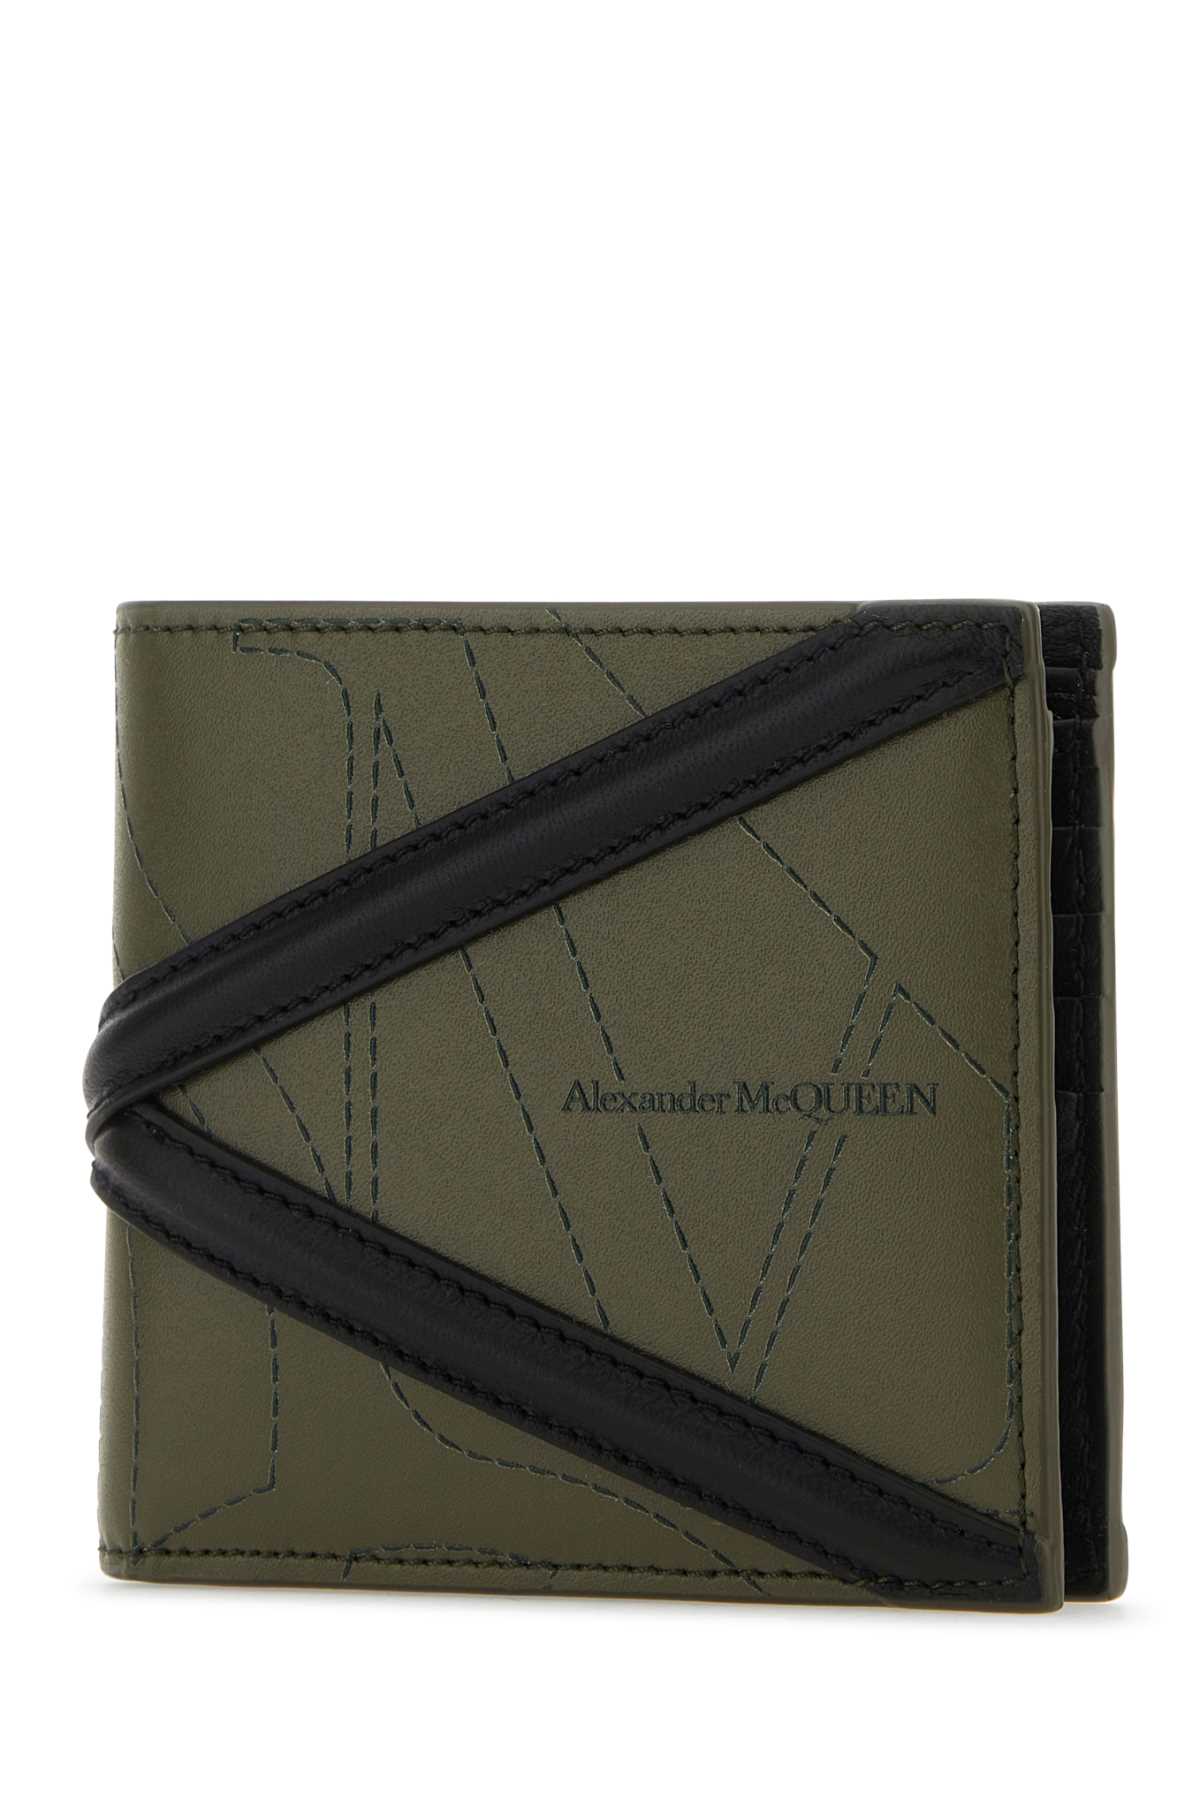 ALEXANDER MCQUEEN ARMY GREEN LEATHER WALLET